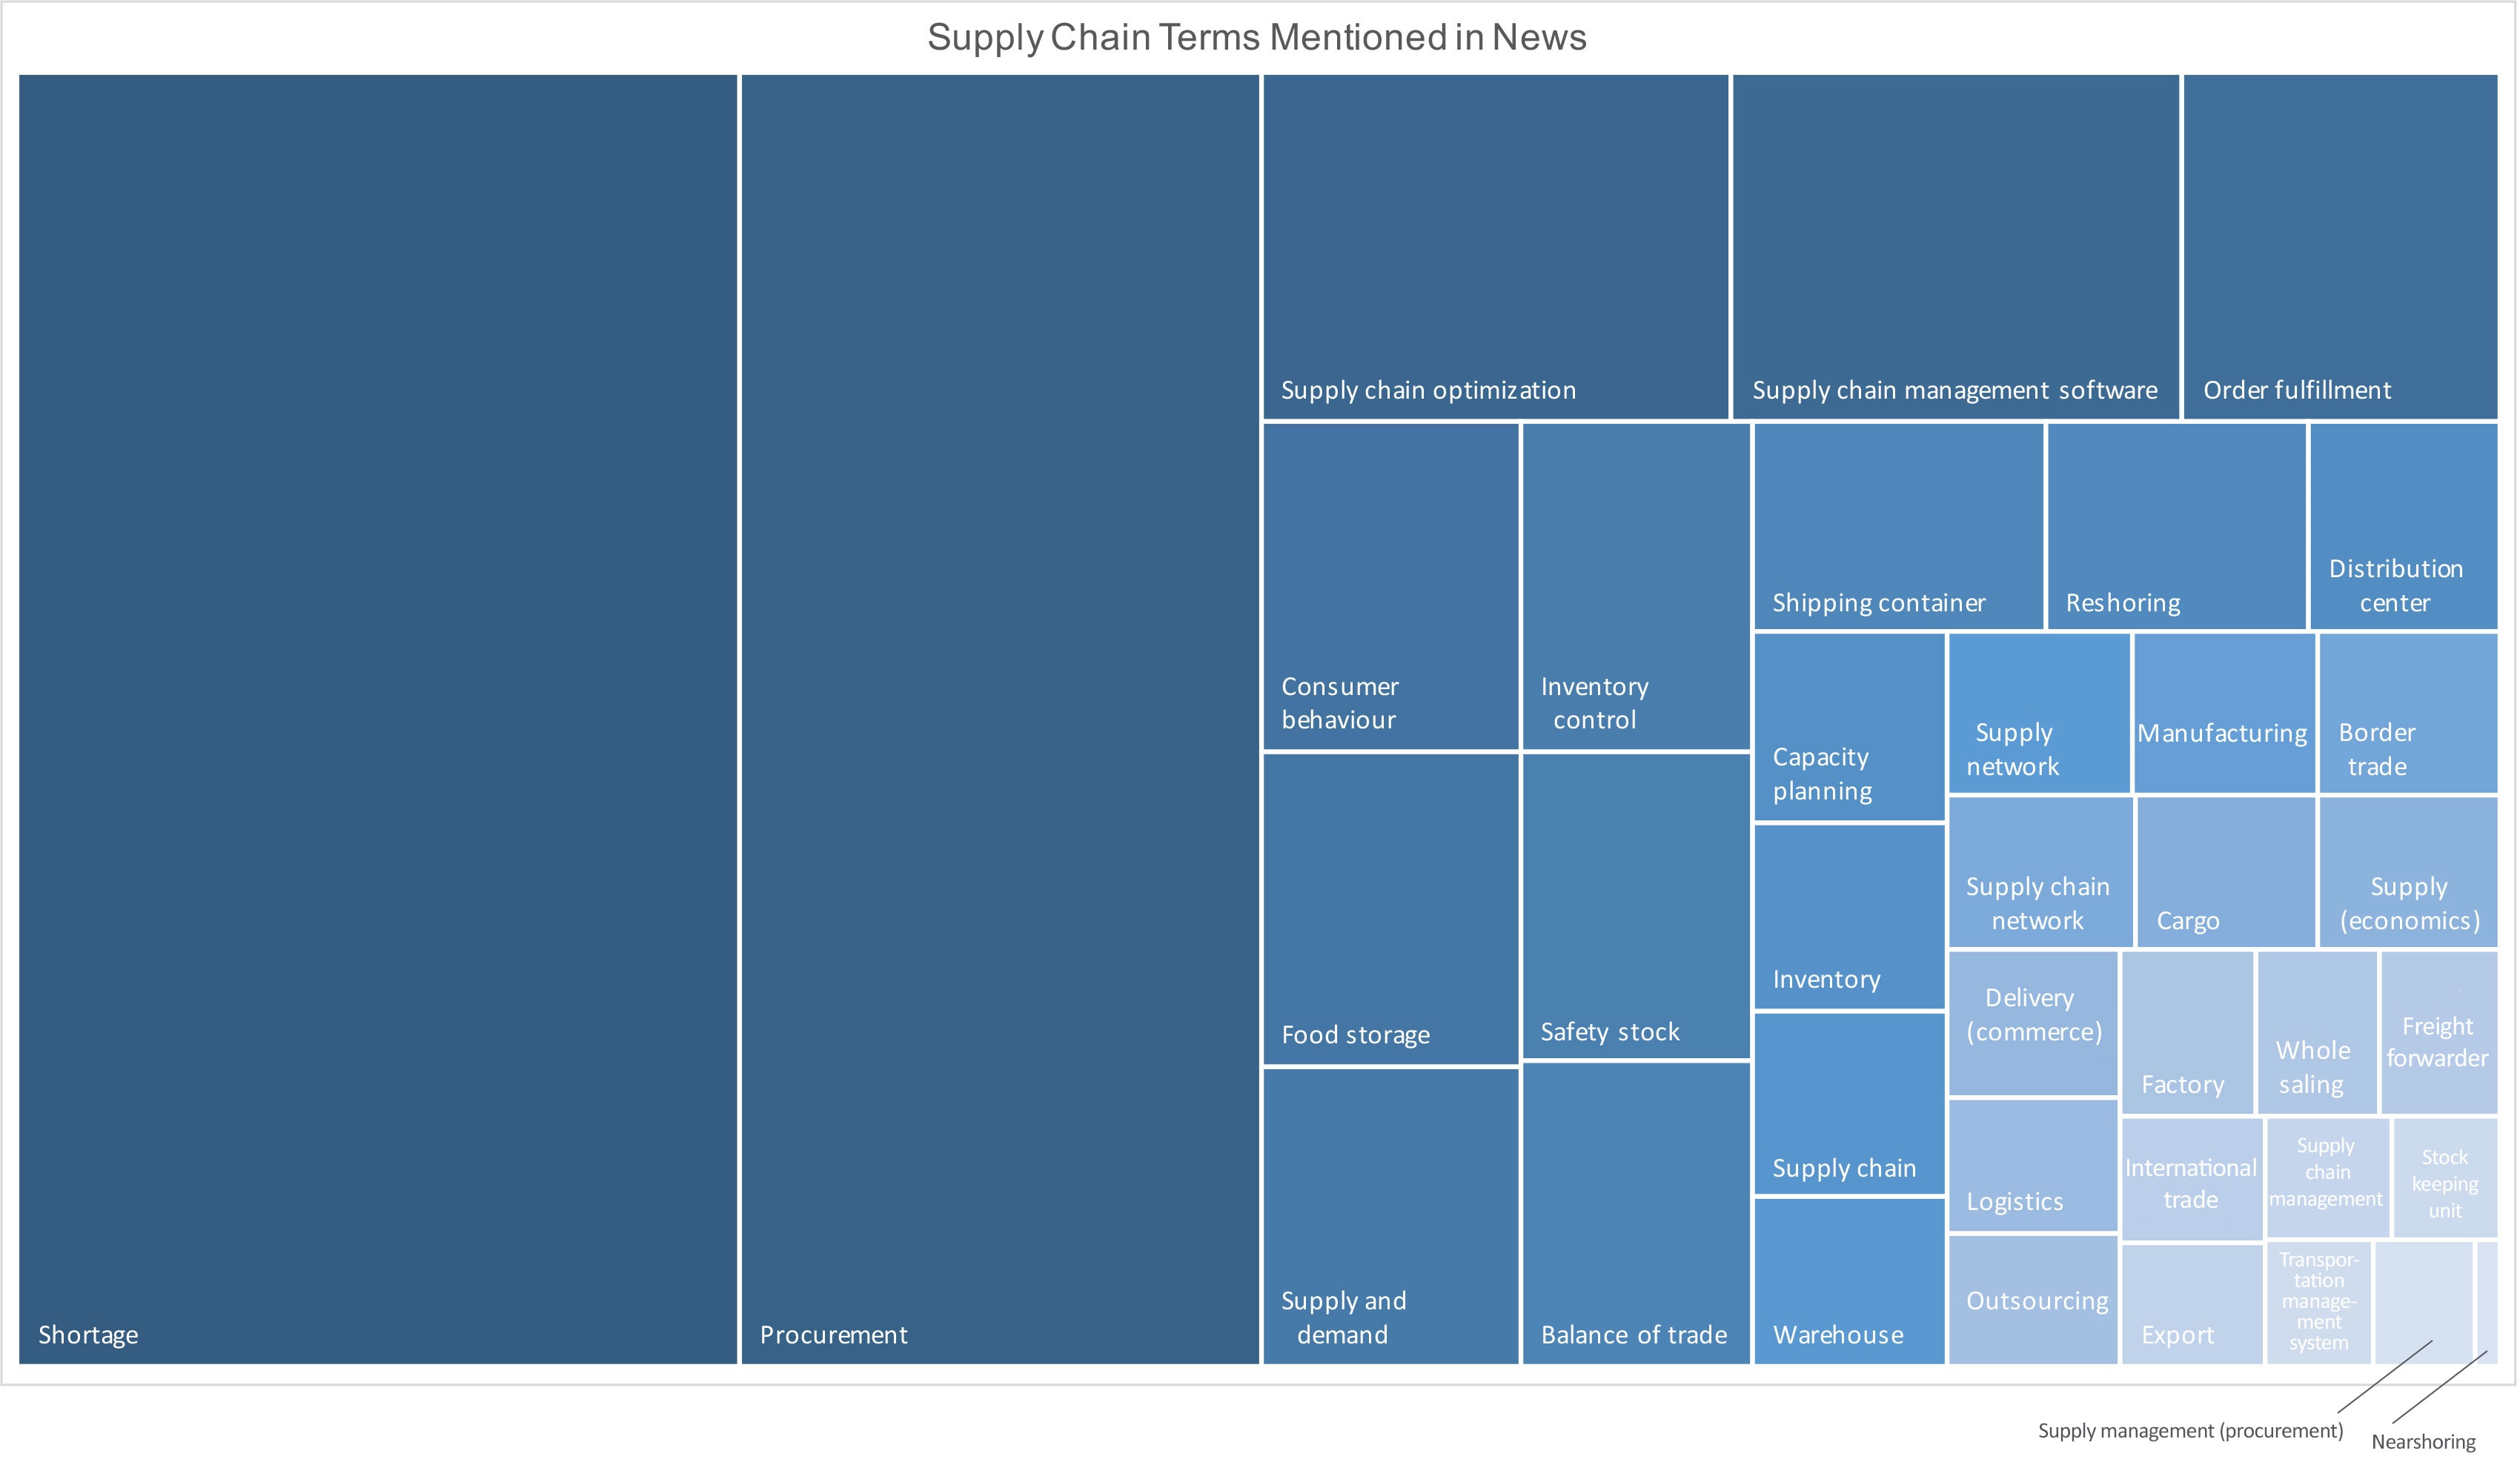 Figure 7. Supply Chain Topics Mentioned in News